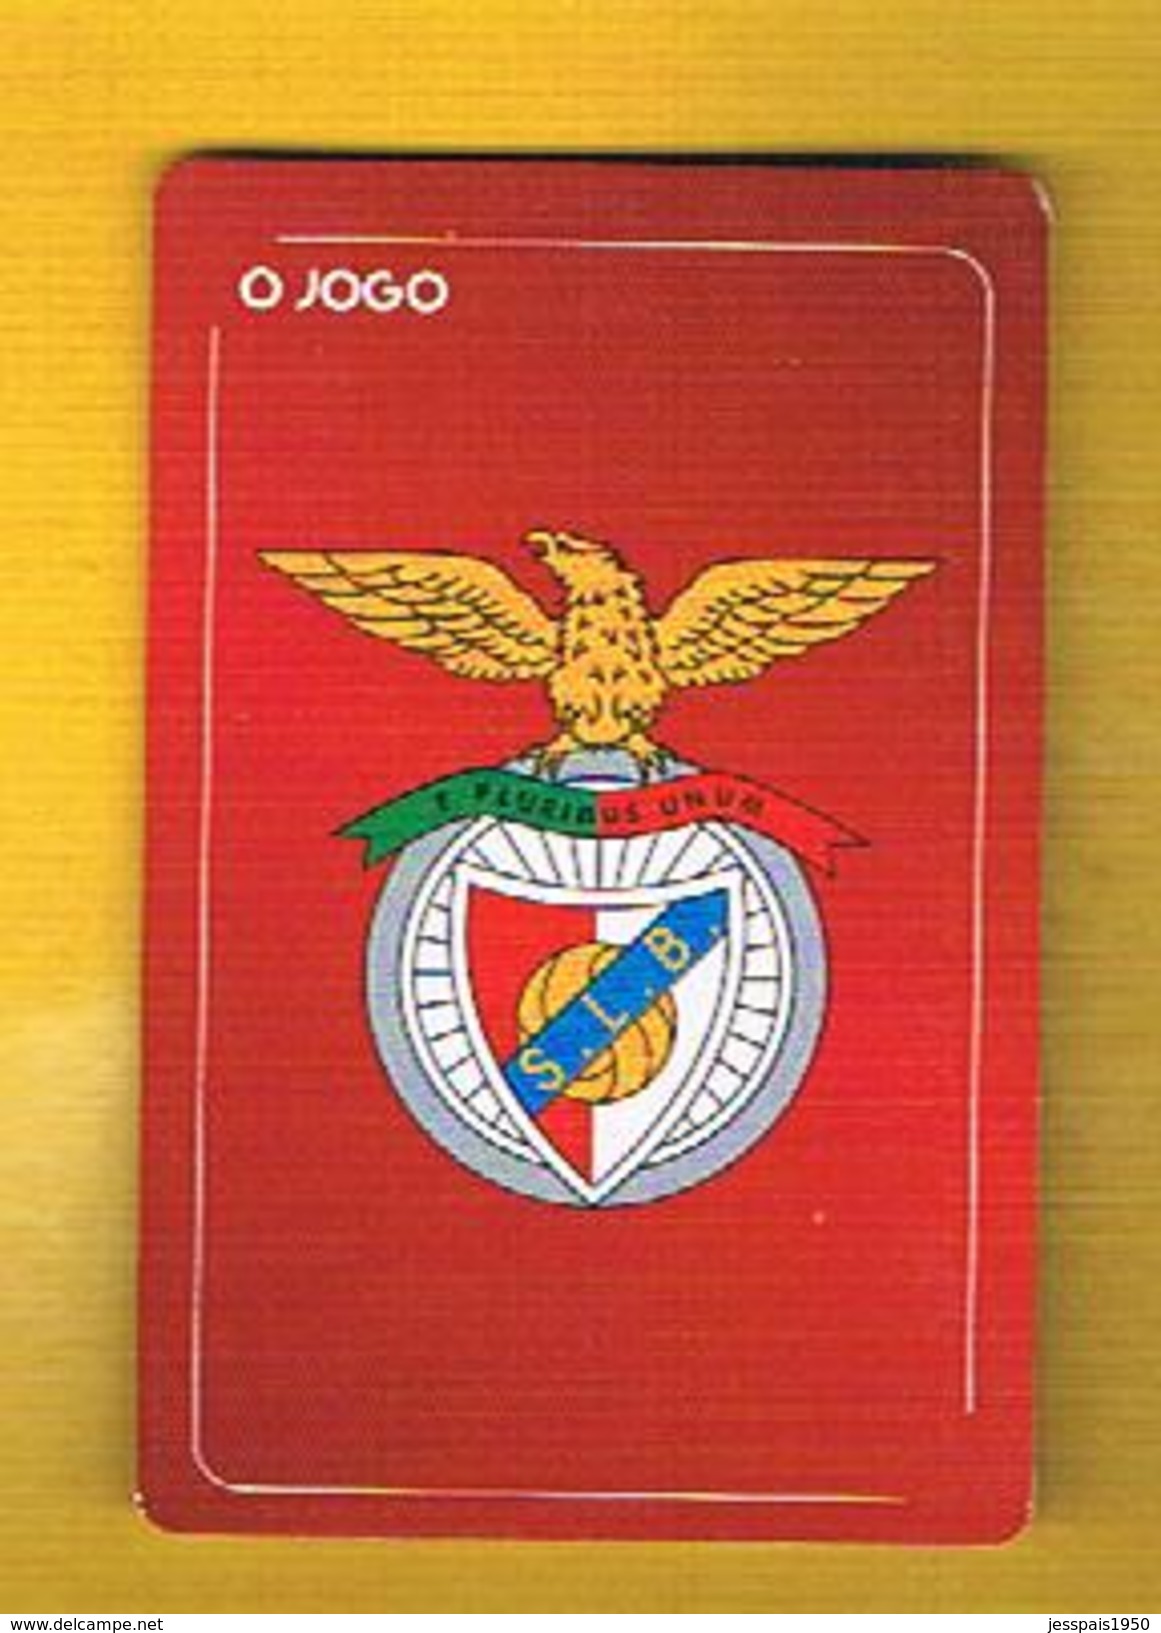 Ref 002 - 1 Joker, Benfica - Playing Cards (classic)